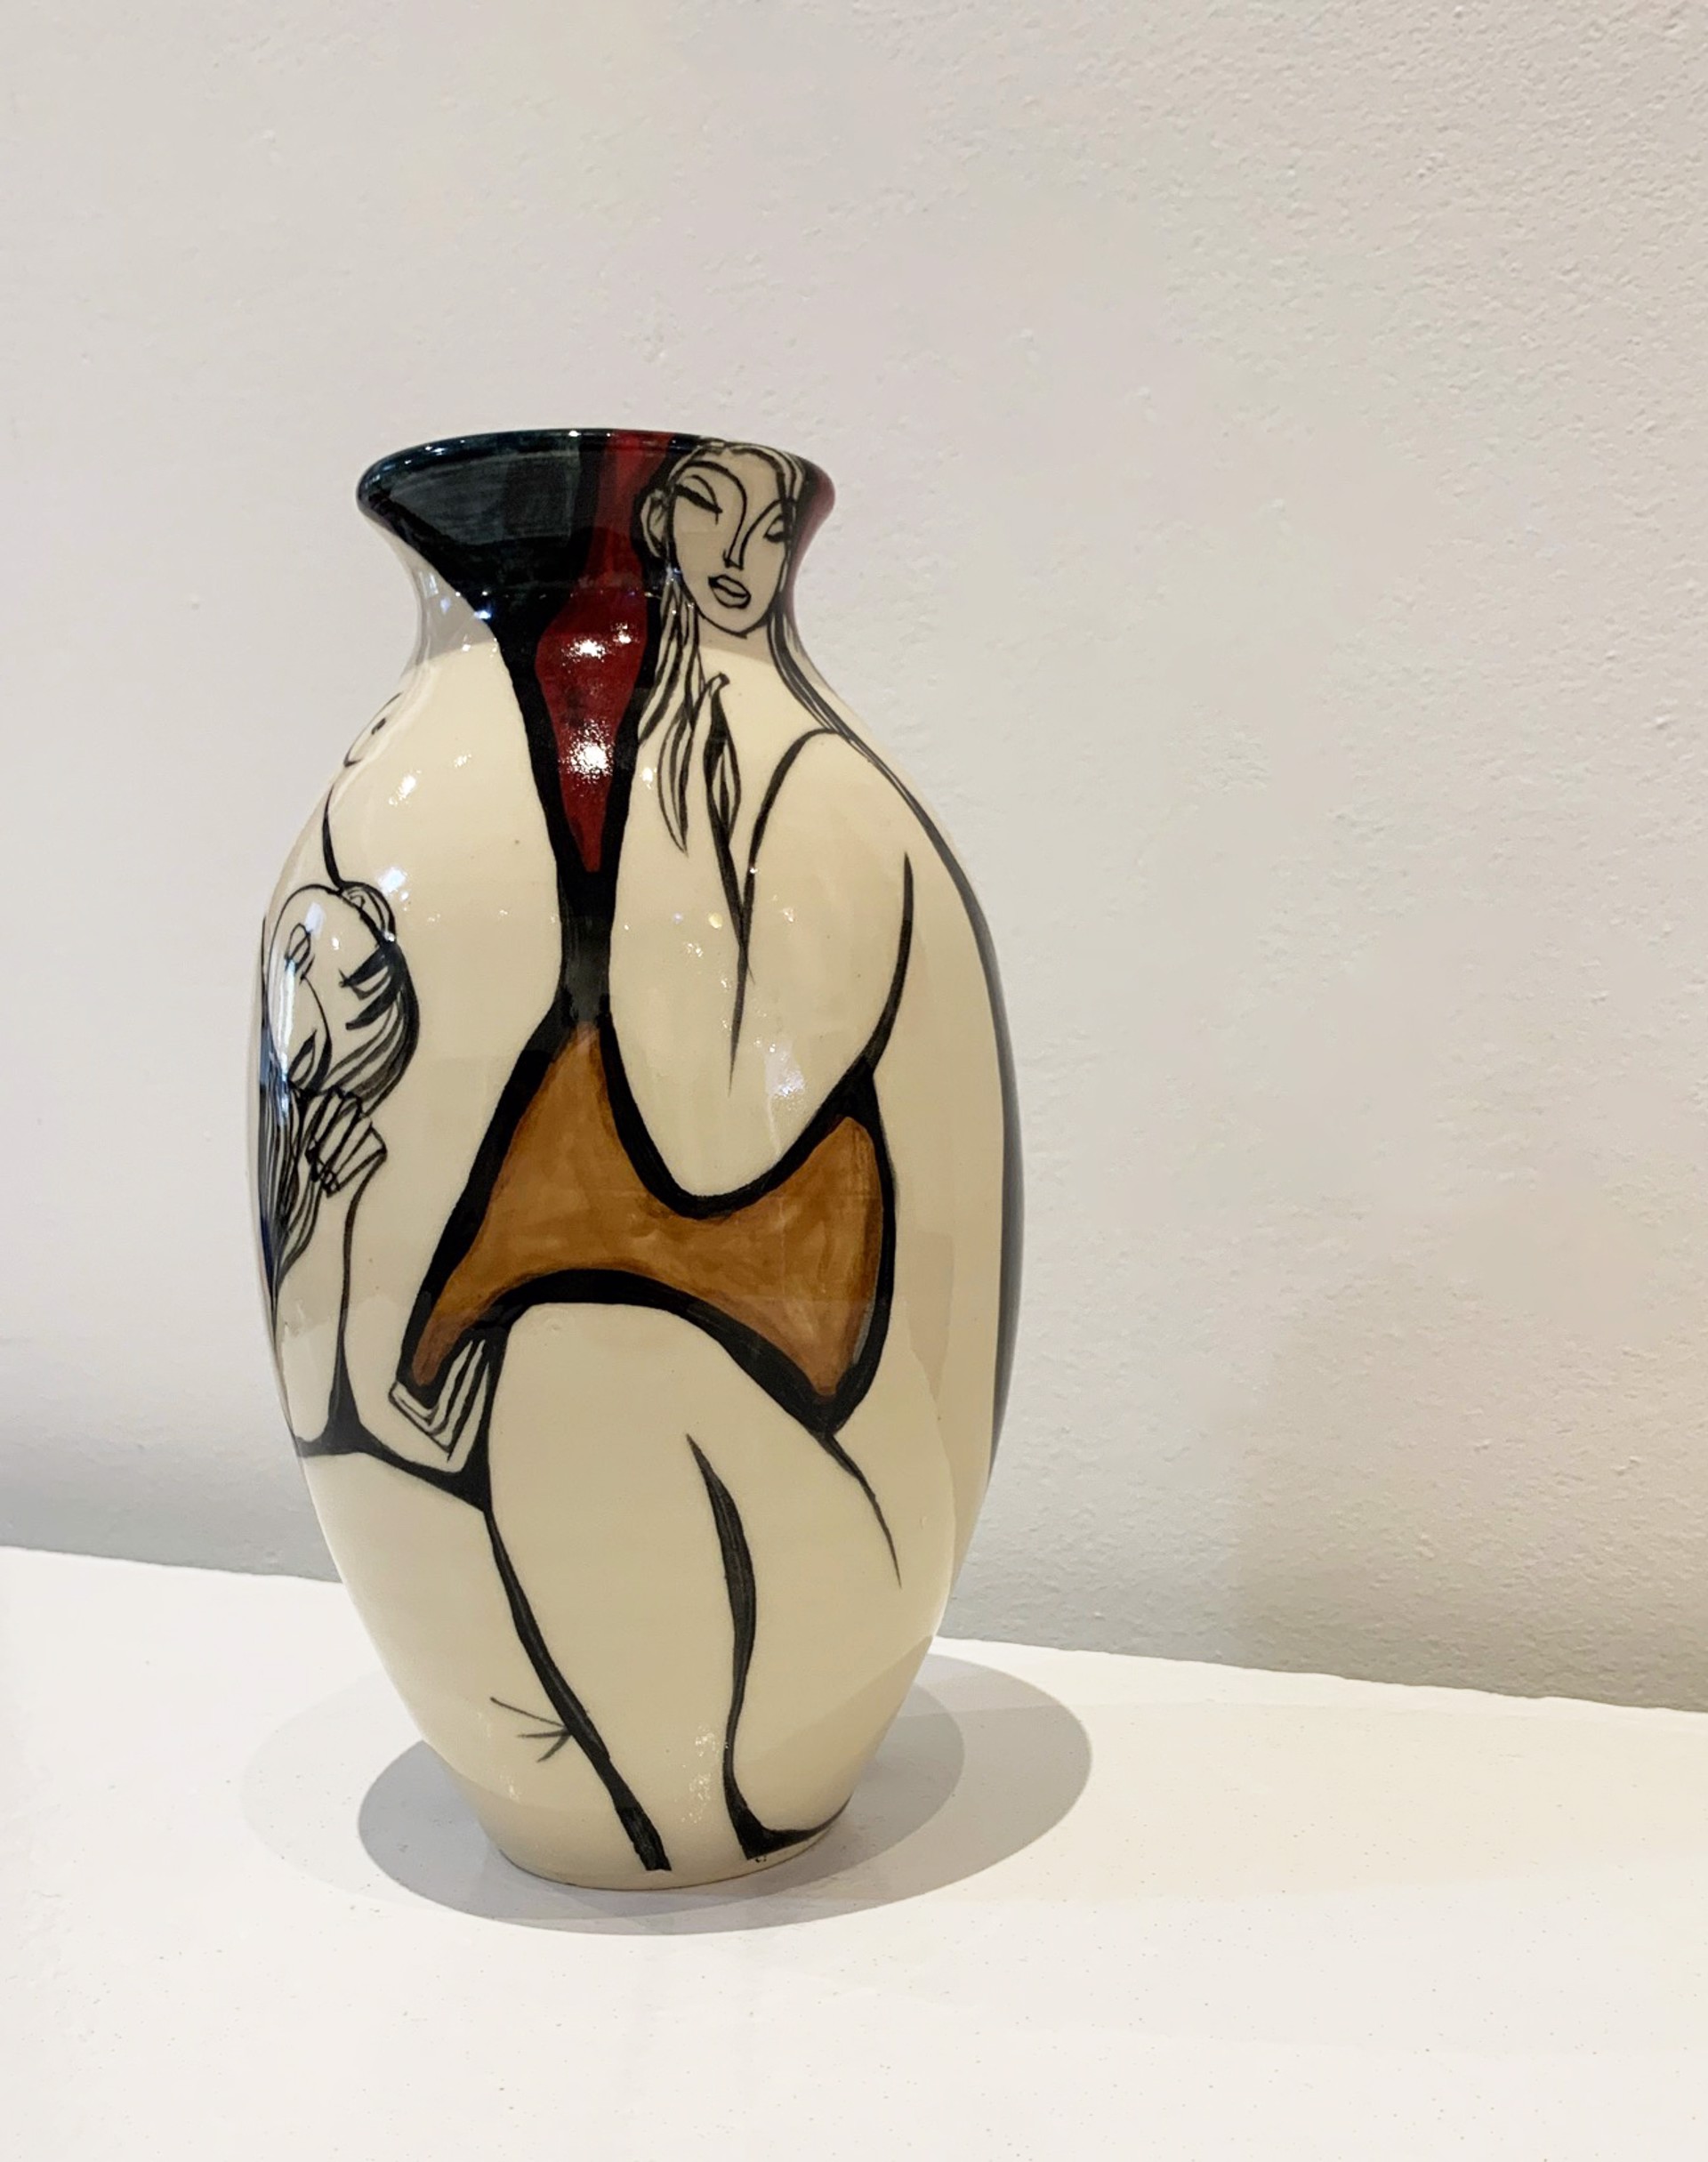 Vase #29 by Ken and Tina Riesterer